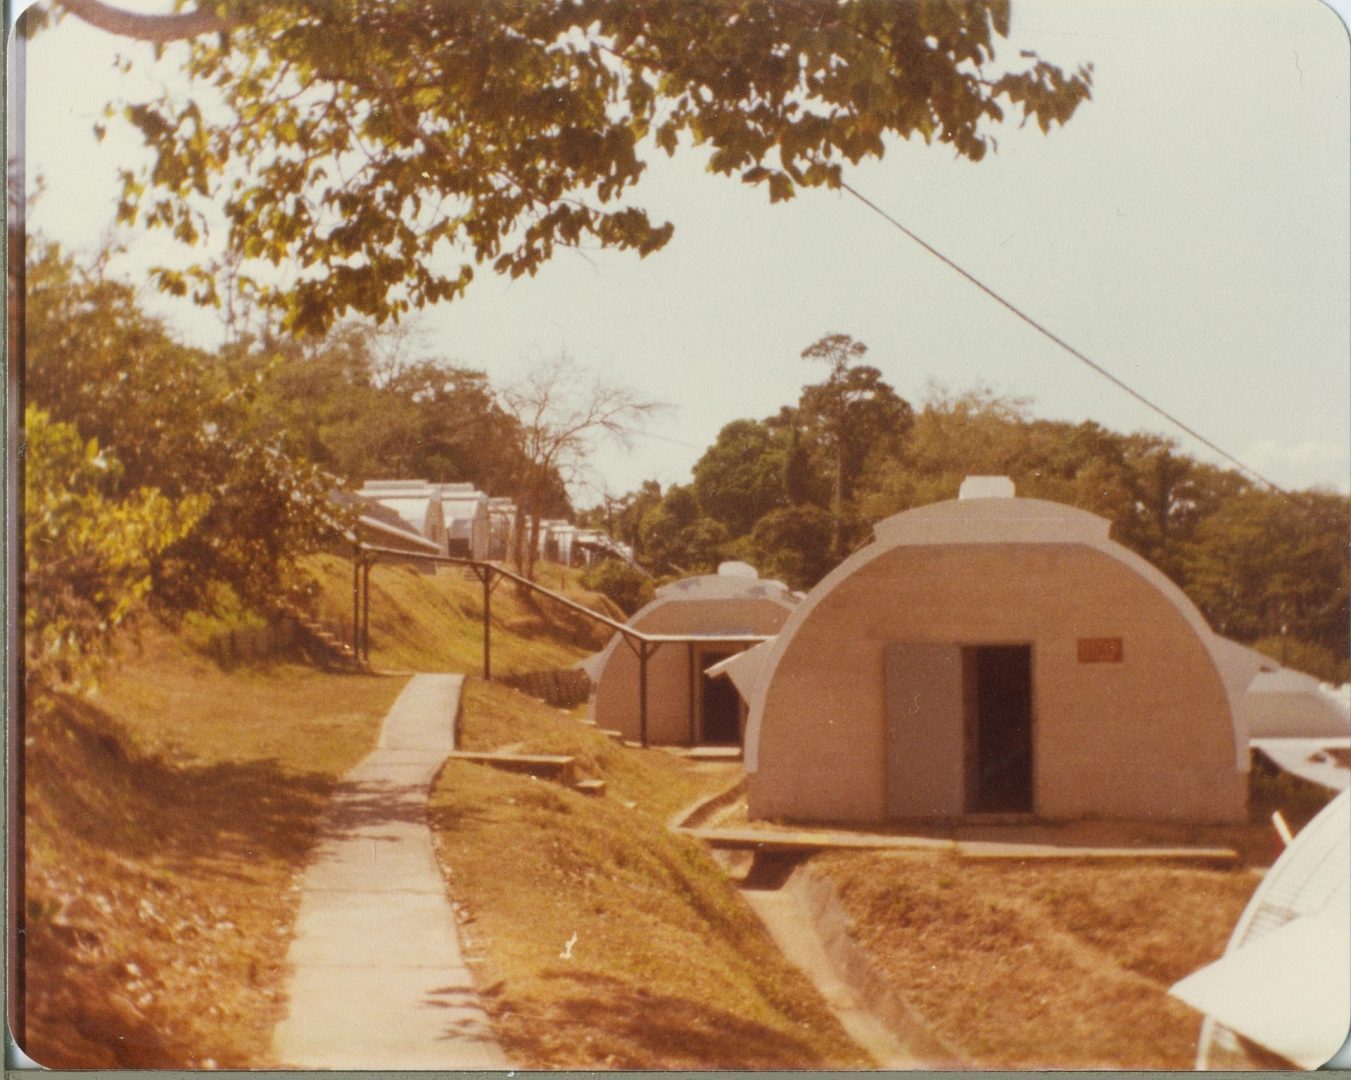 Upper MAU Camp 1981 Courtesy of mtfrazier on flickr